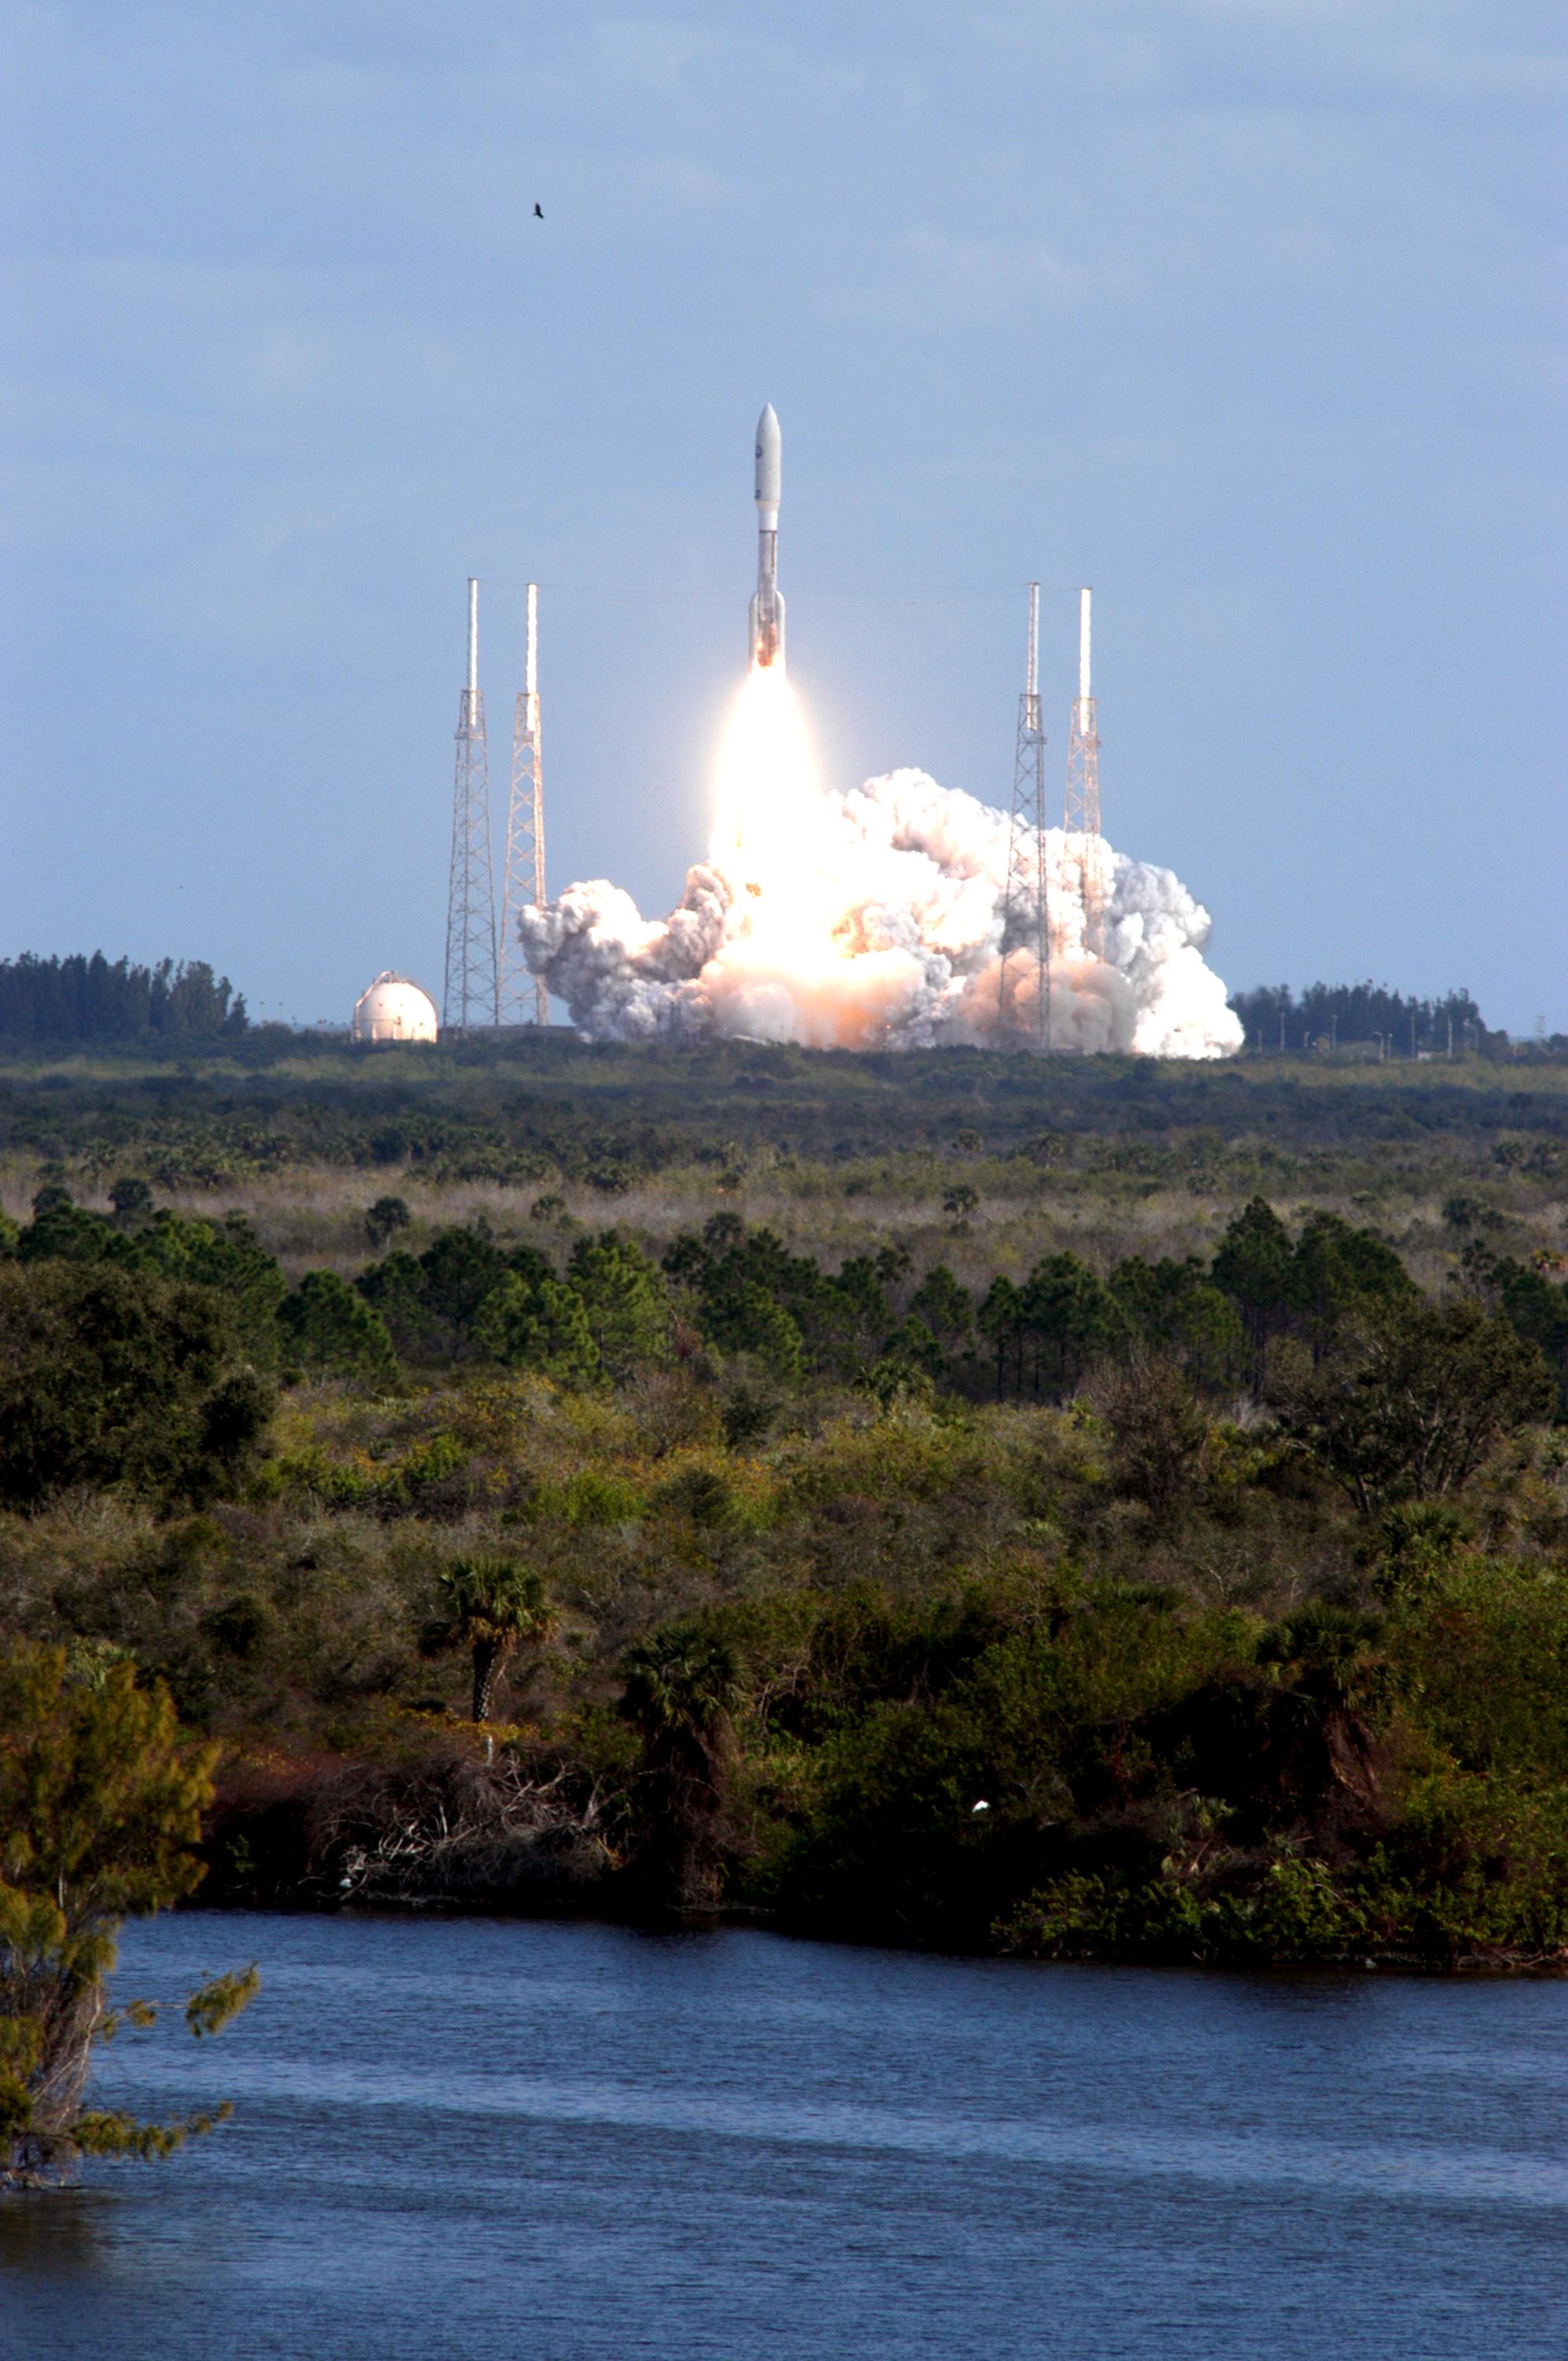 New Horizons roars into the afternoon sky aboard a powerful Atlas V rocket